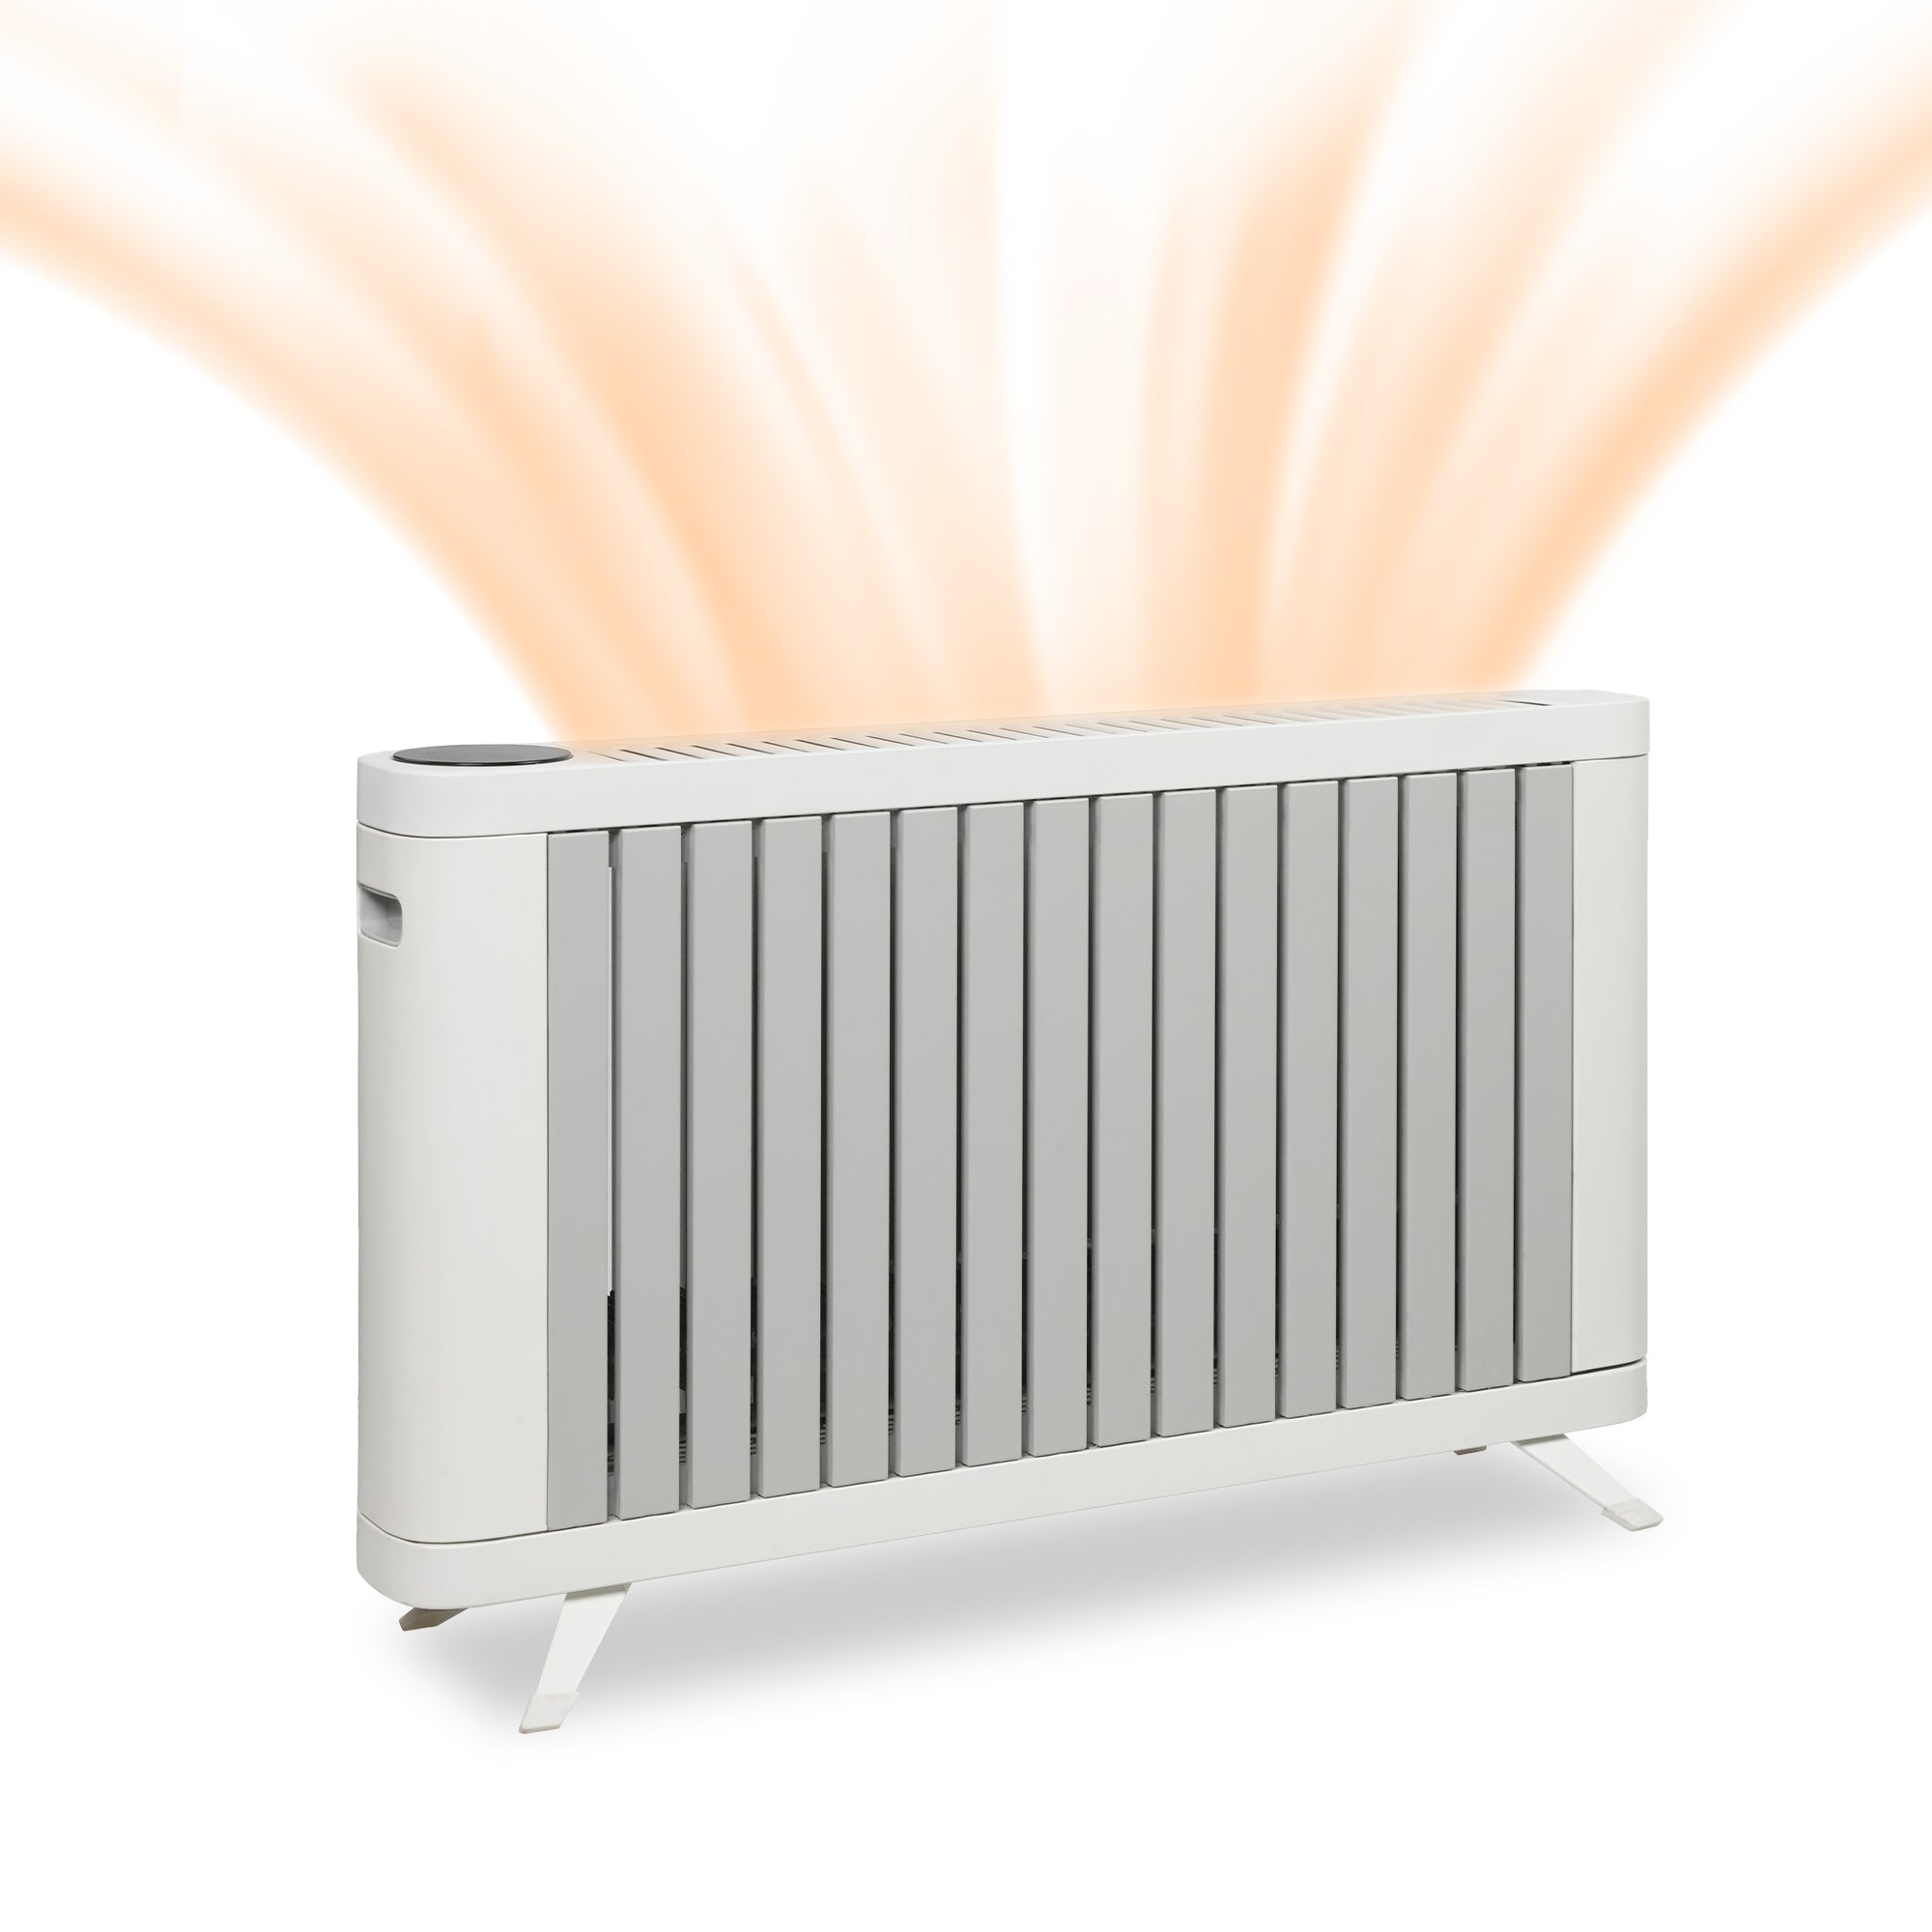 1500W Smart Radiator Space Heater with 3 Heating Modes Adjustable Thermostat